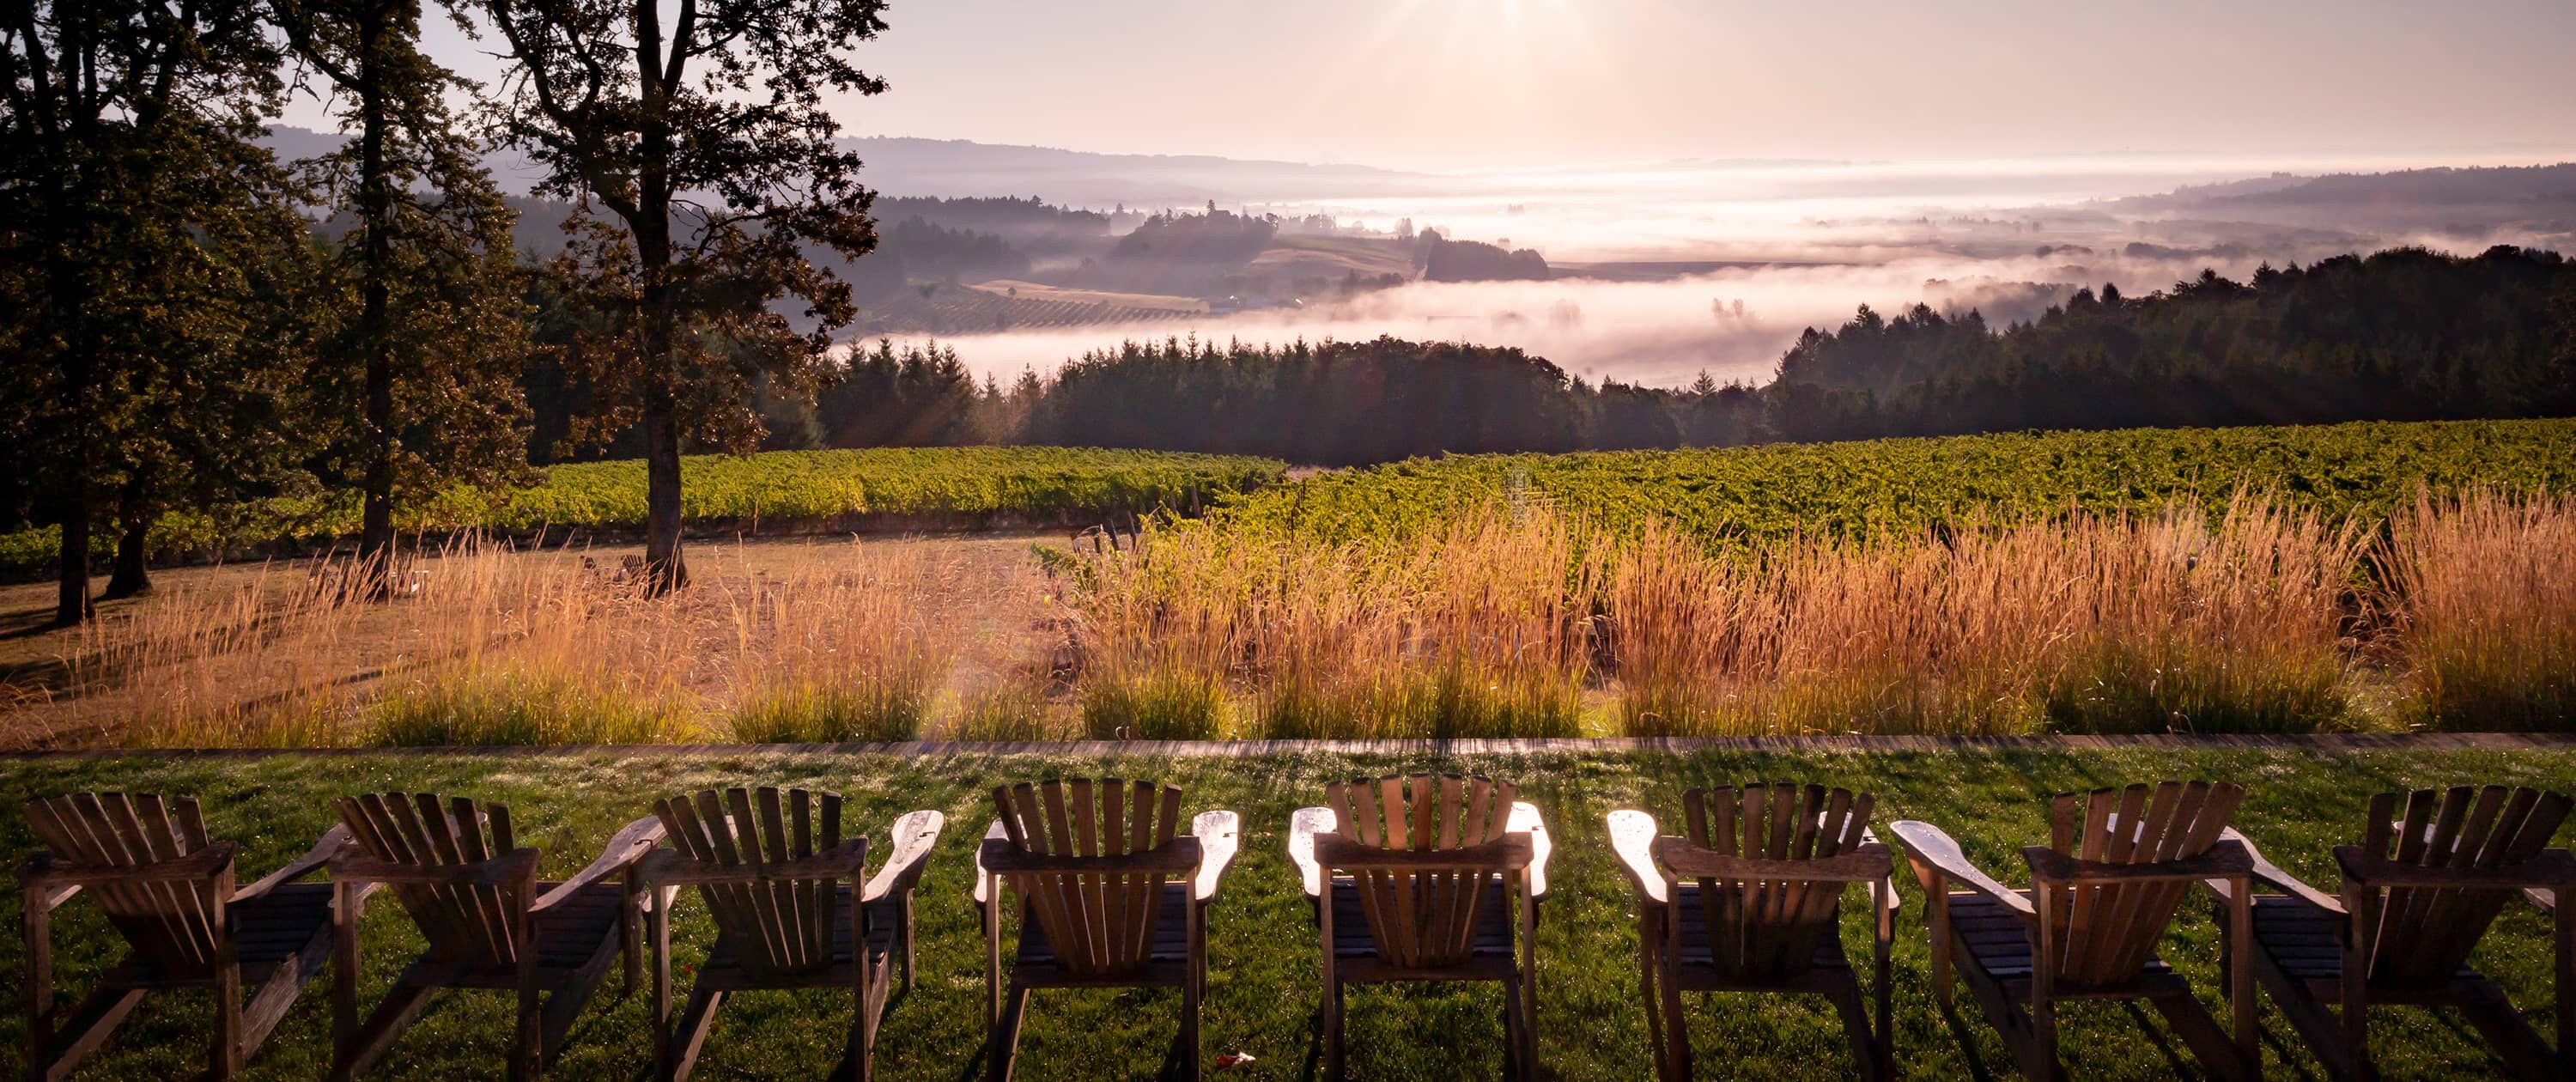 A line of wooden adirondack chairs face out to overlook the Penner-Ash vineyard.